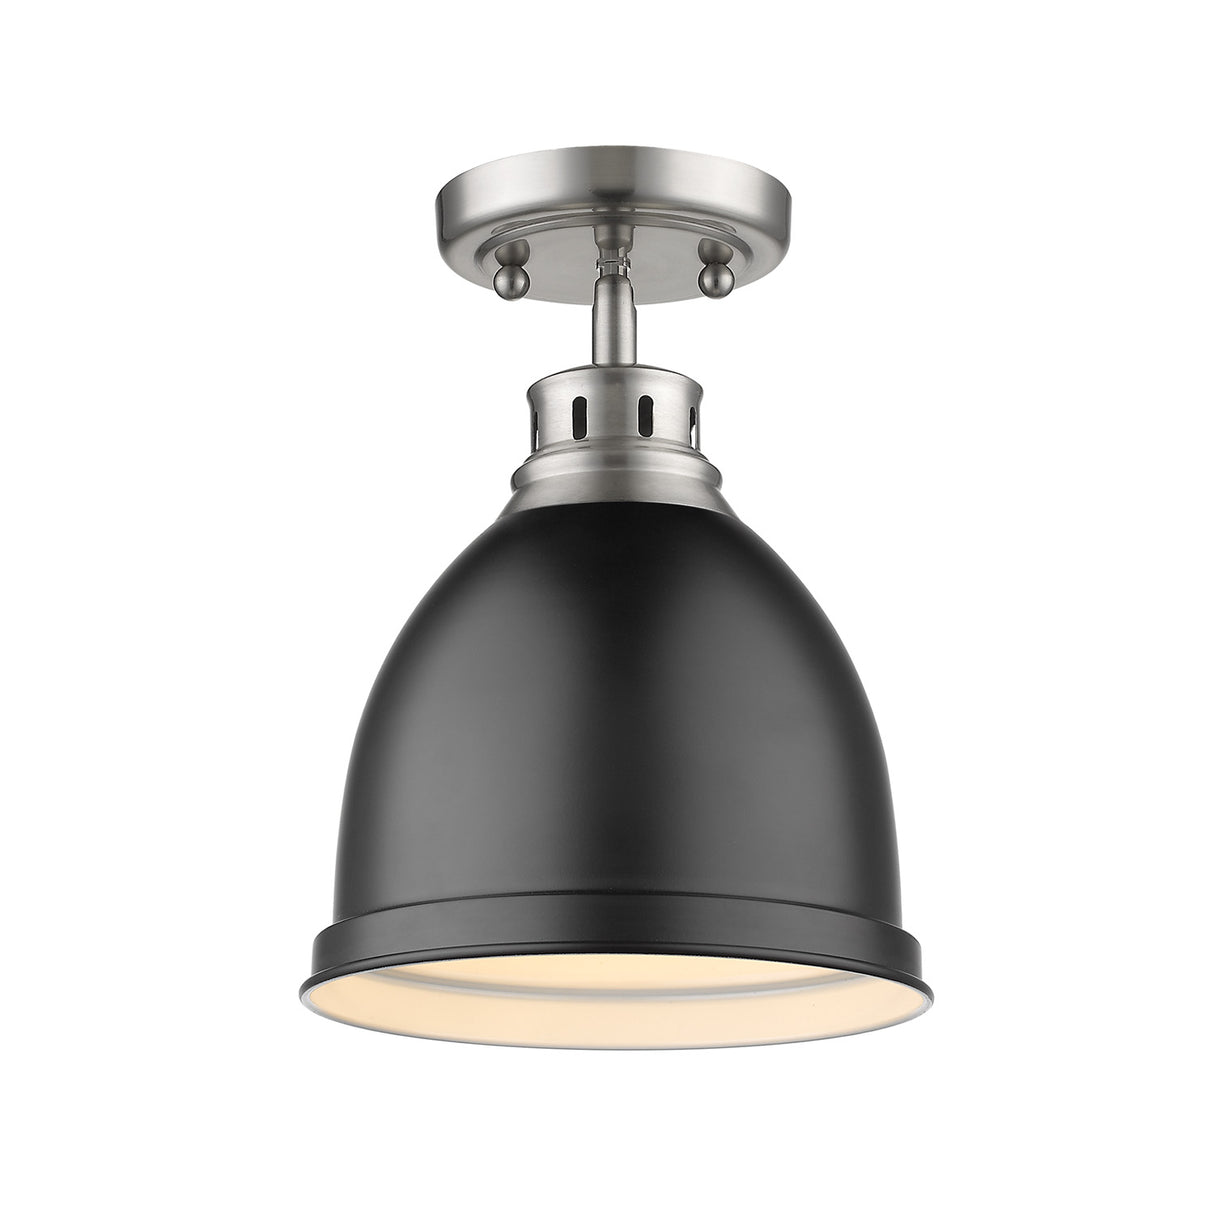 Duncan Flush Mount in Pewter with a Matte Black Shade